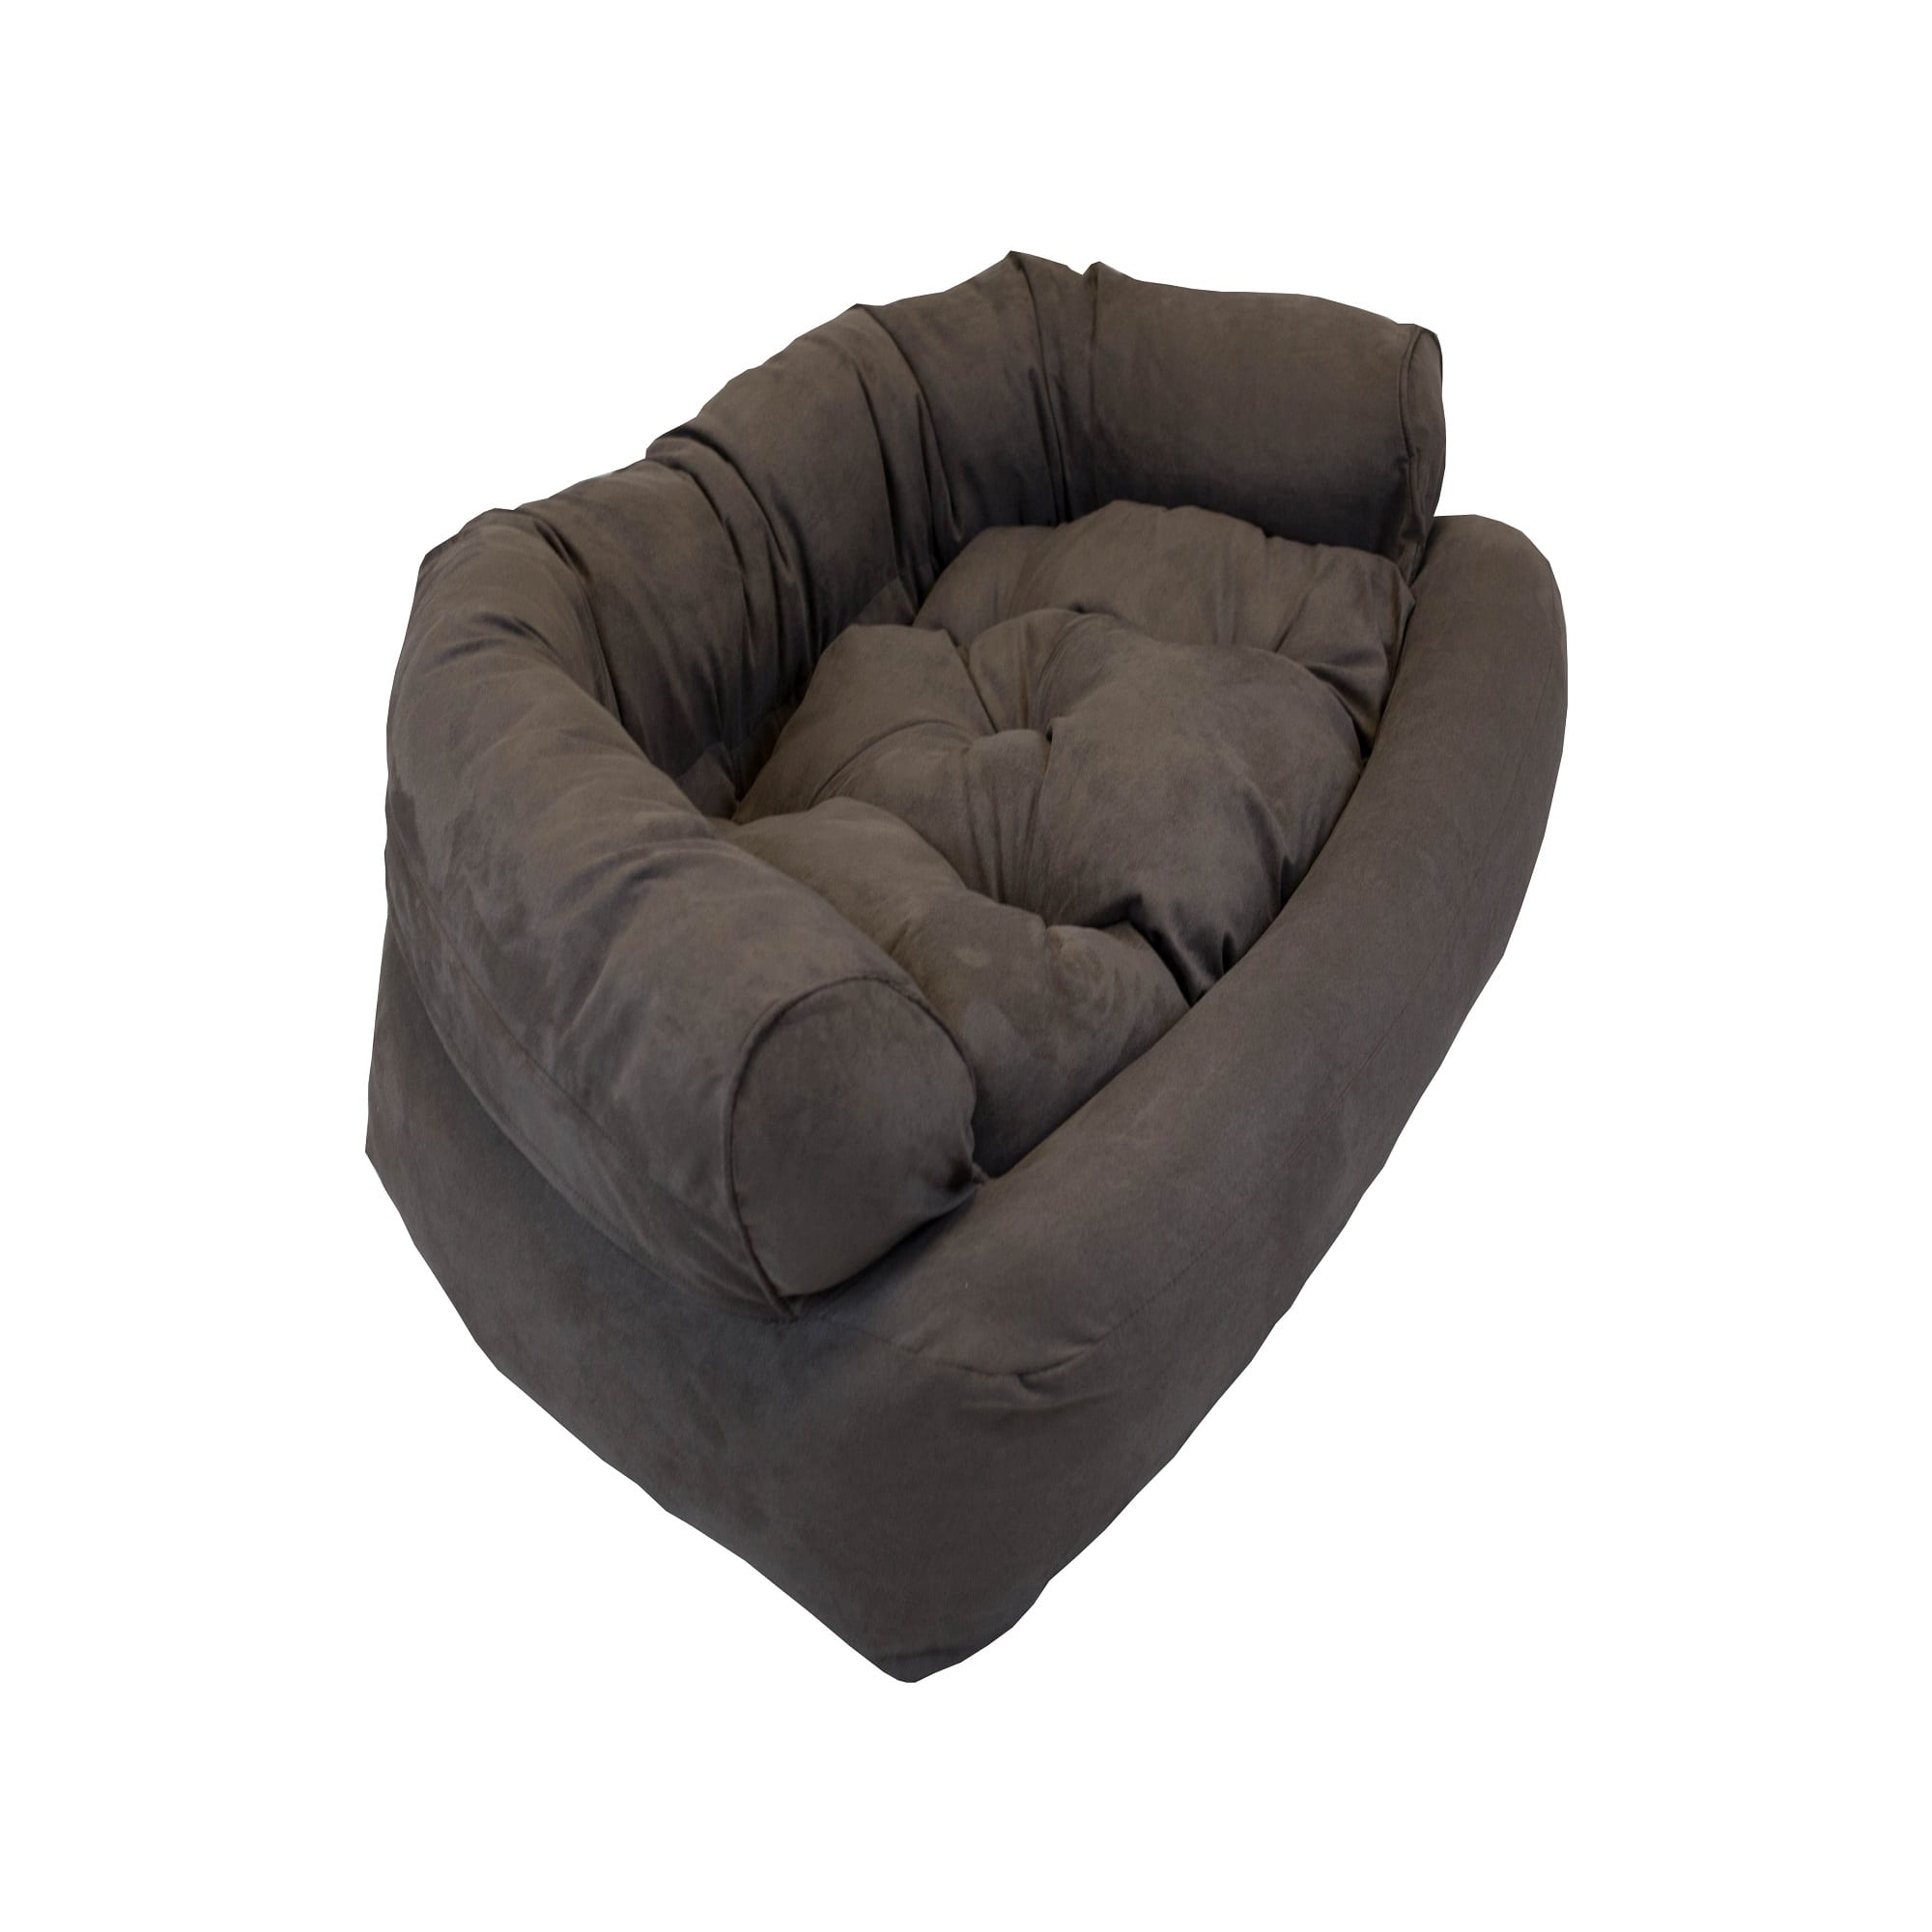 Photos - Bed & Furniture Snoozer Luxury Micro Suede Overstuffed Pet Sofa, 20" L X 30" W X 8 